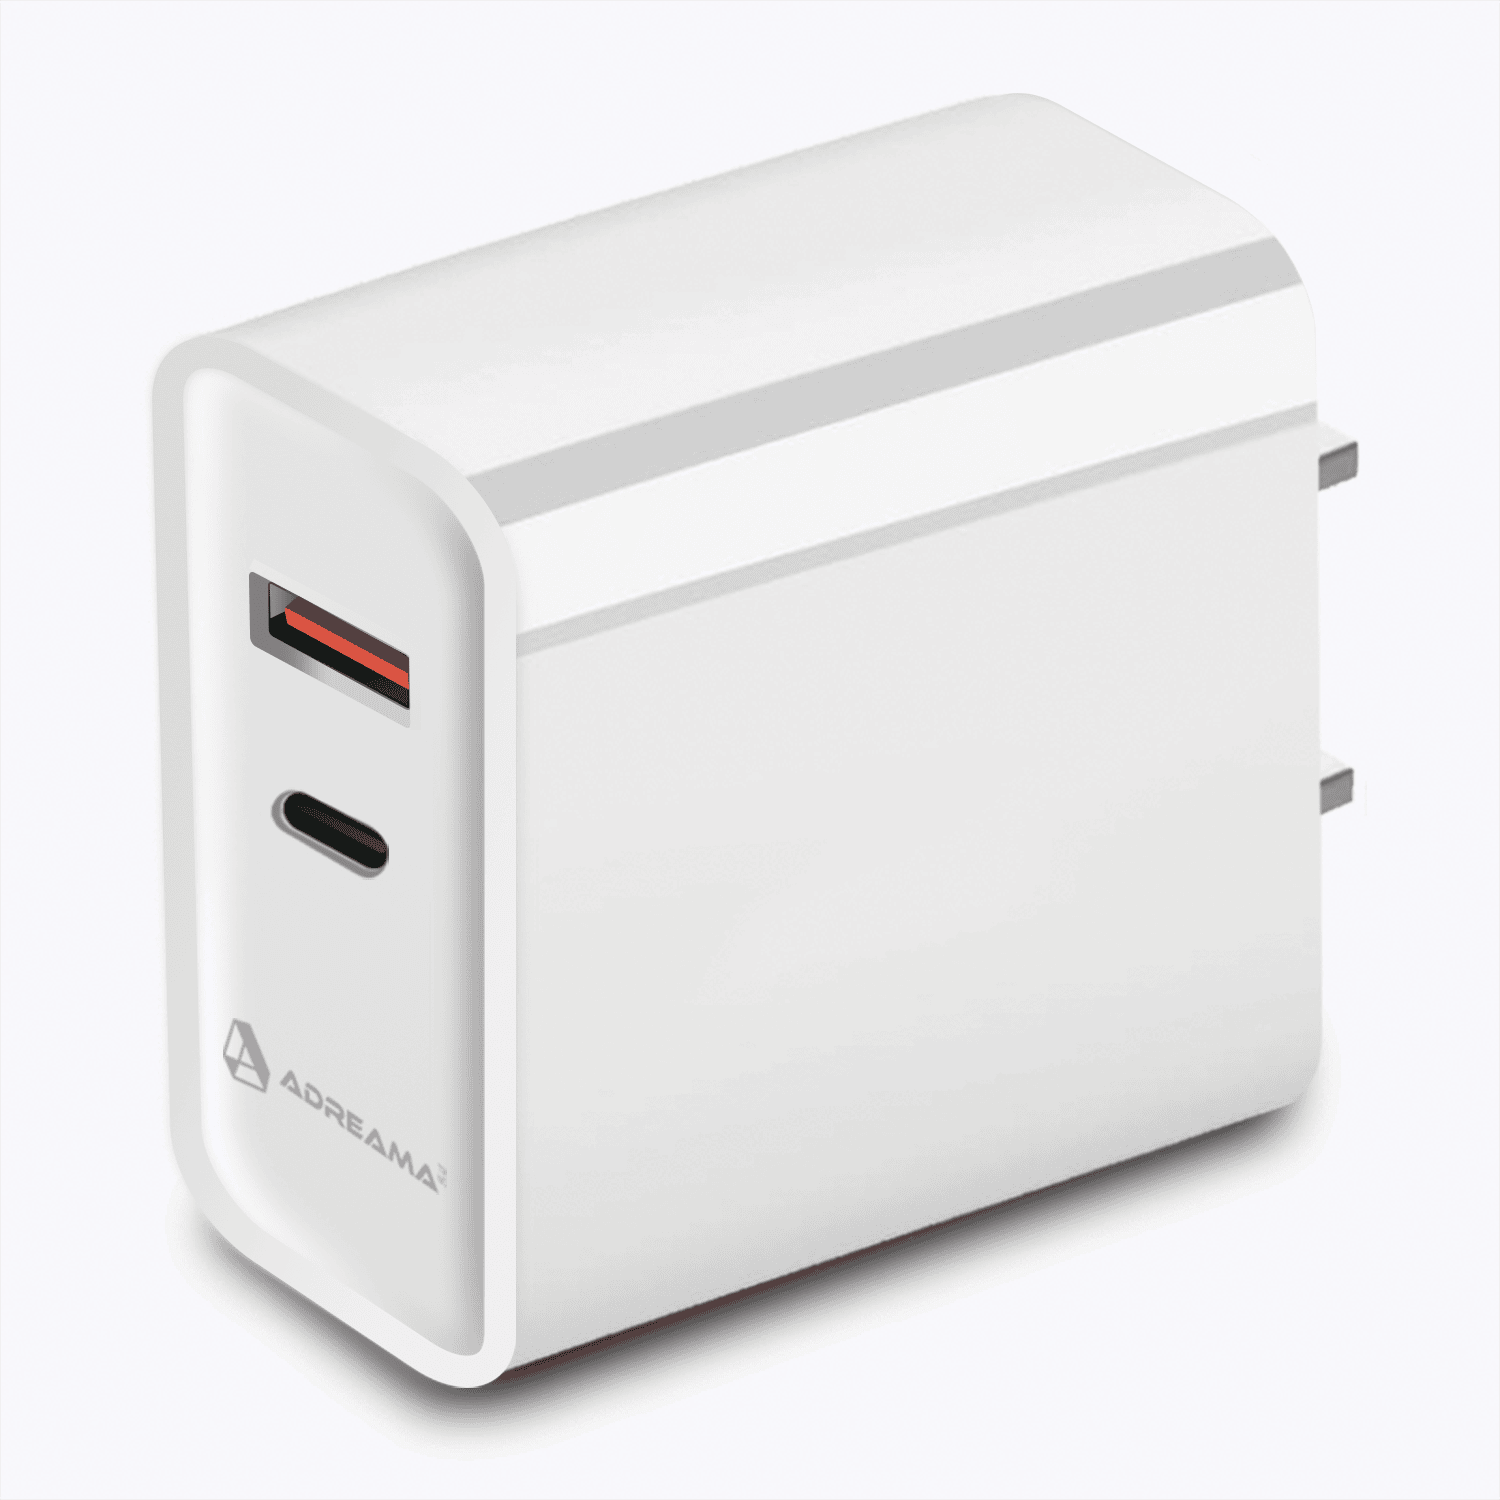 Go Green with the Adreama Eco-friendly PD 20W Wall Charger USB-C + USB-A